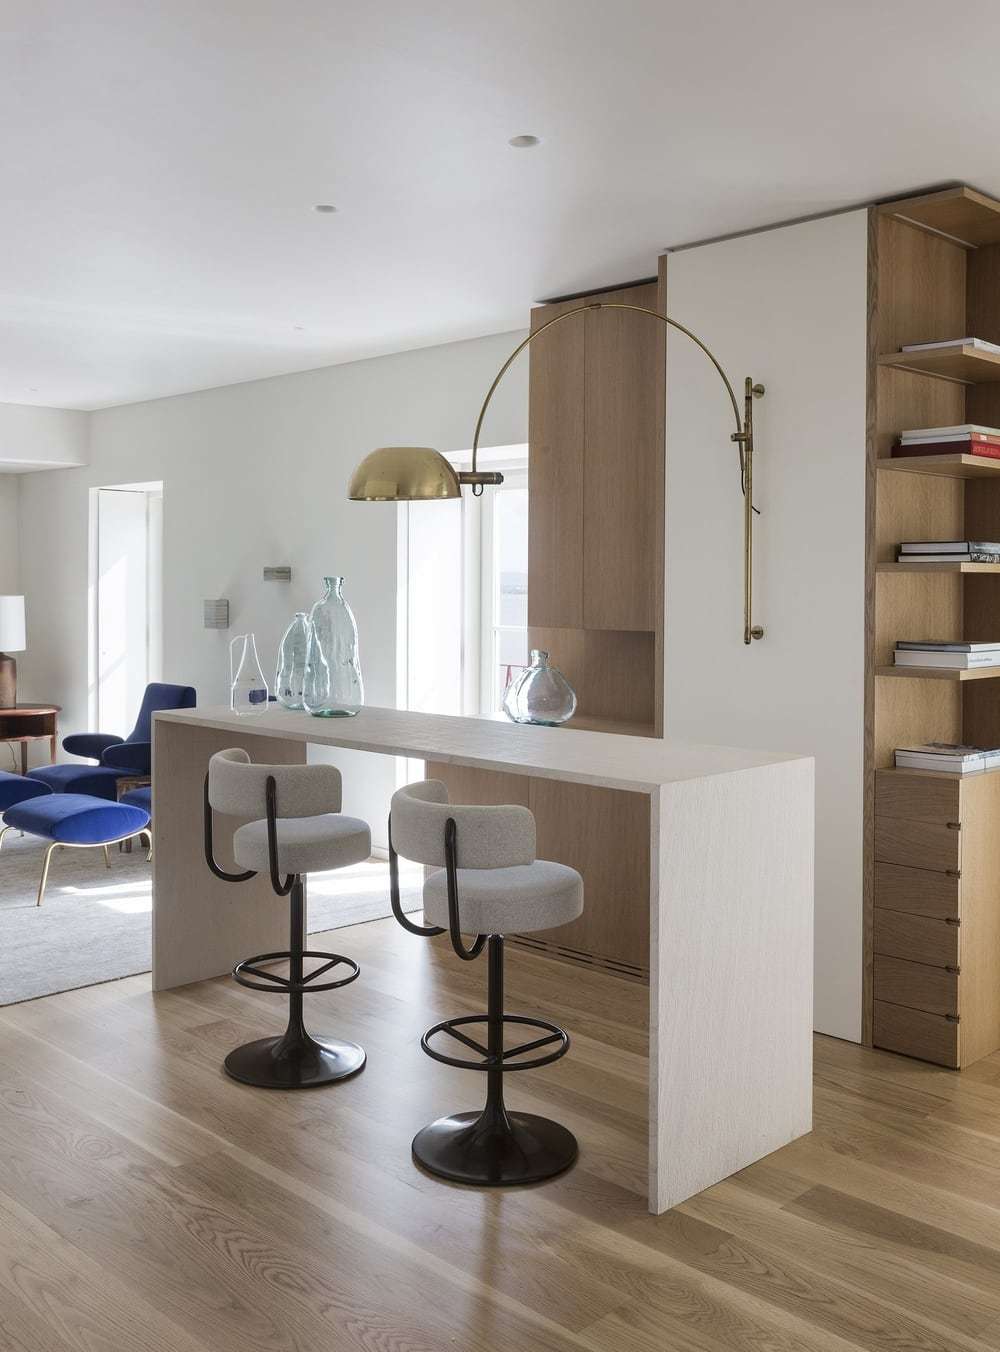 Penthouse Apartment in Lisbon Features Neutral Tones and Wood Finishings